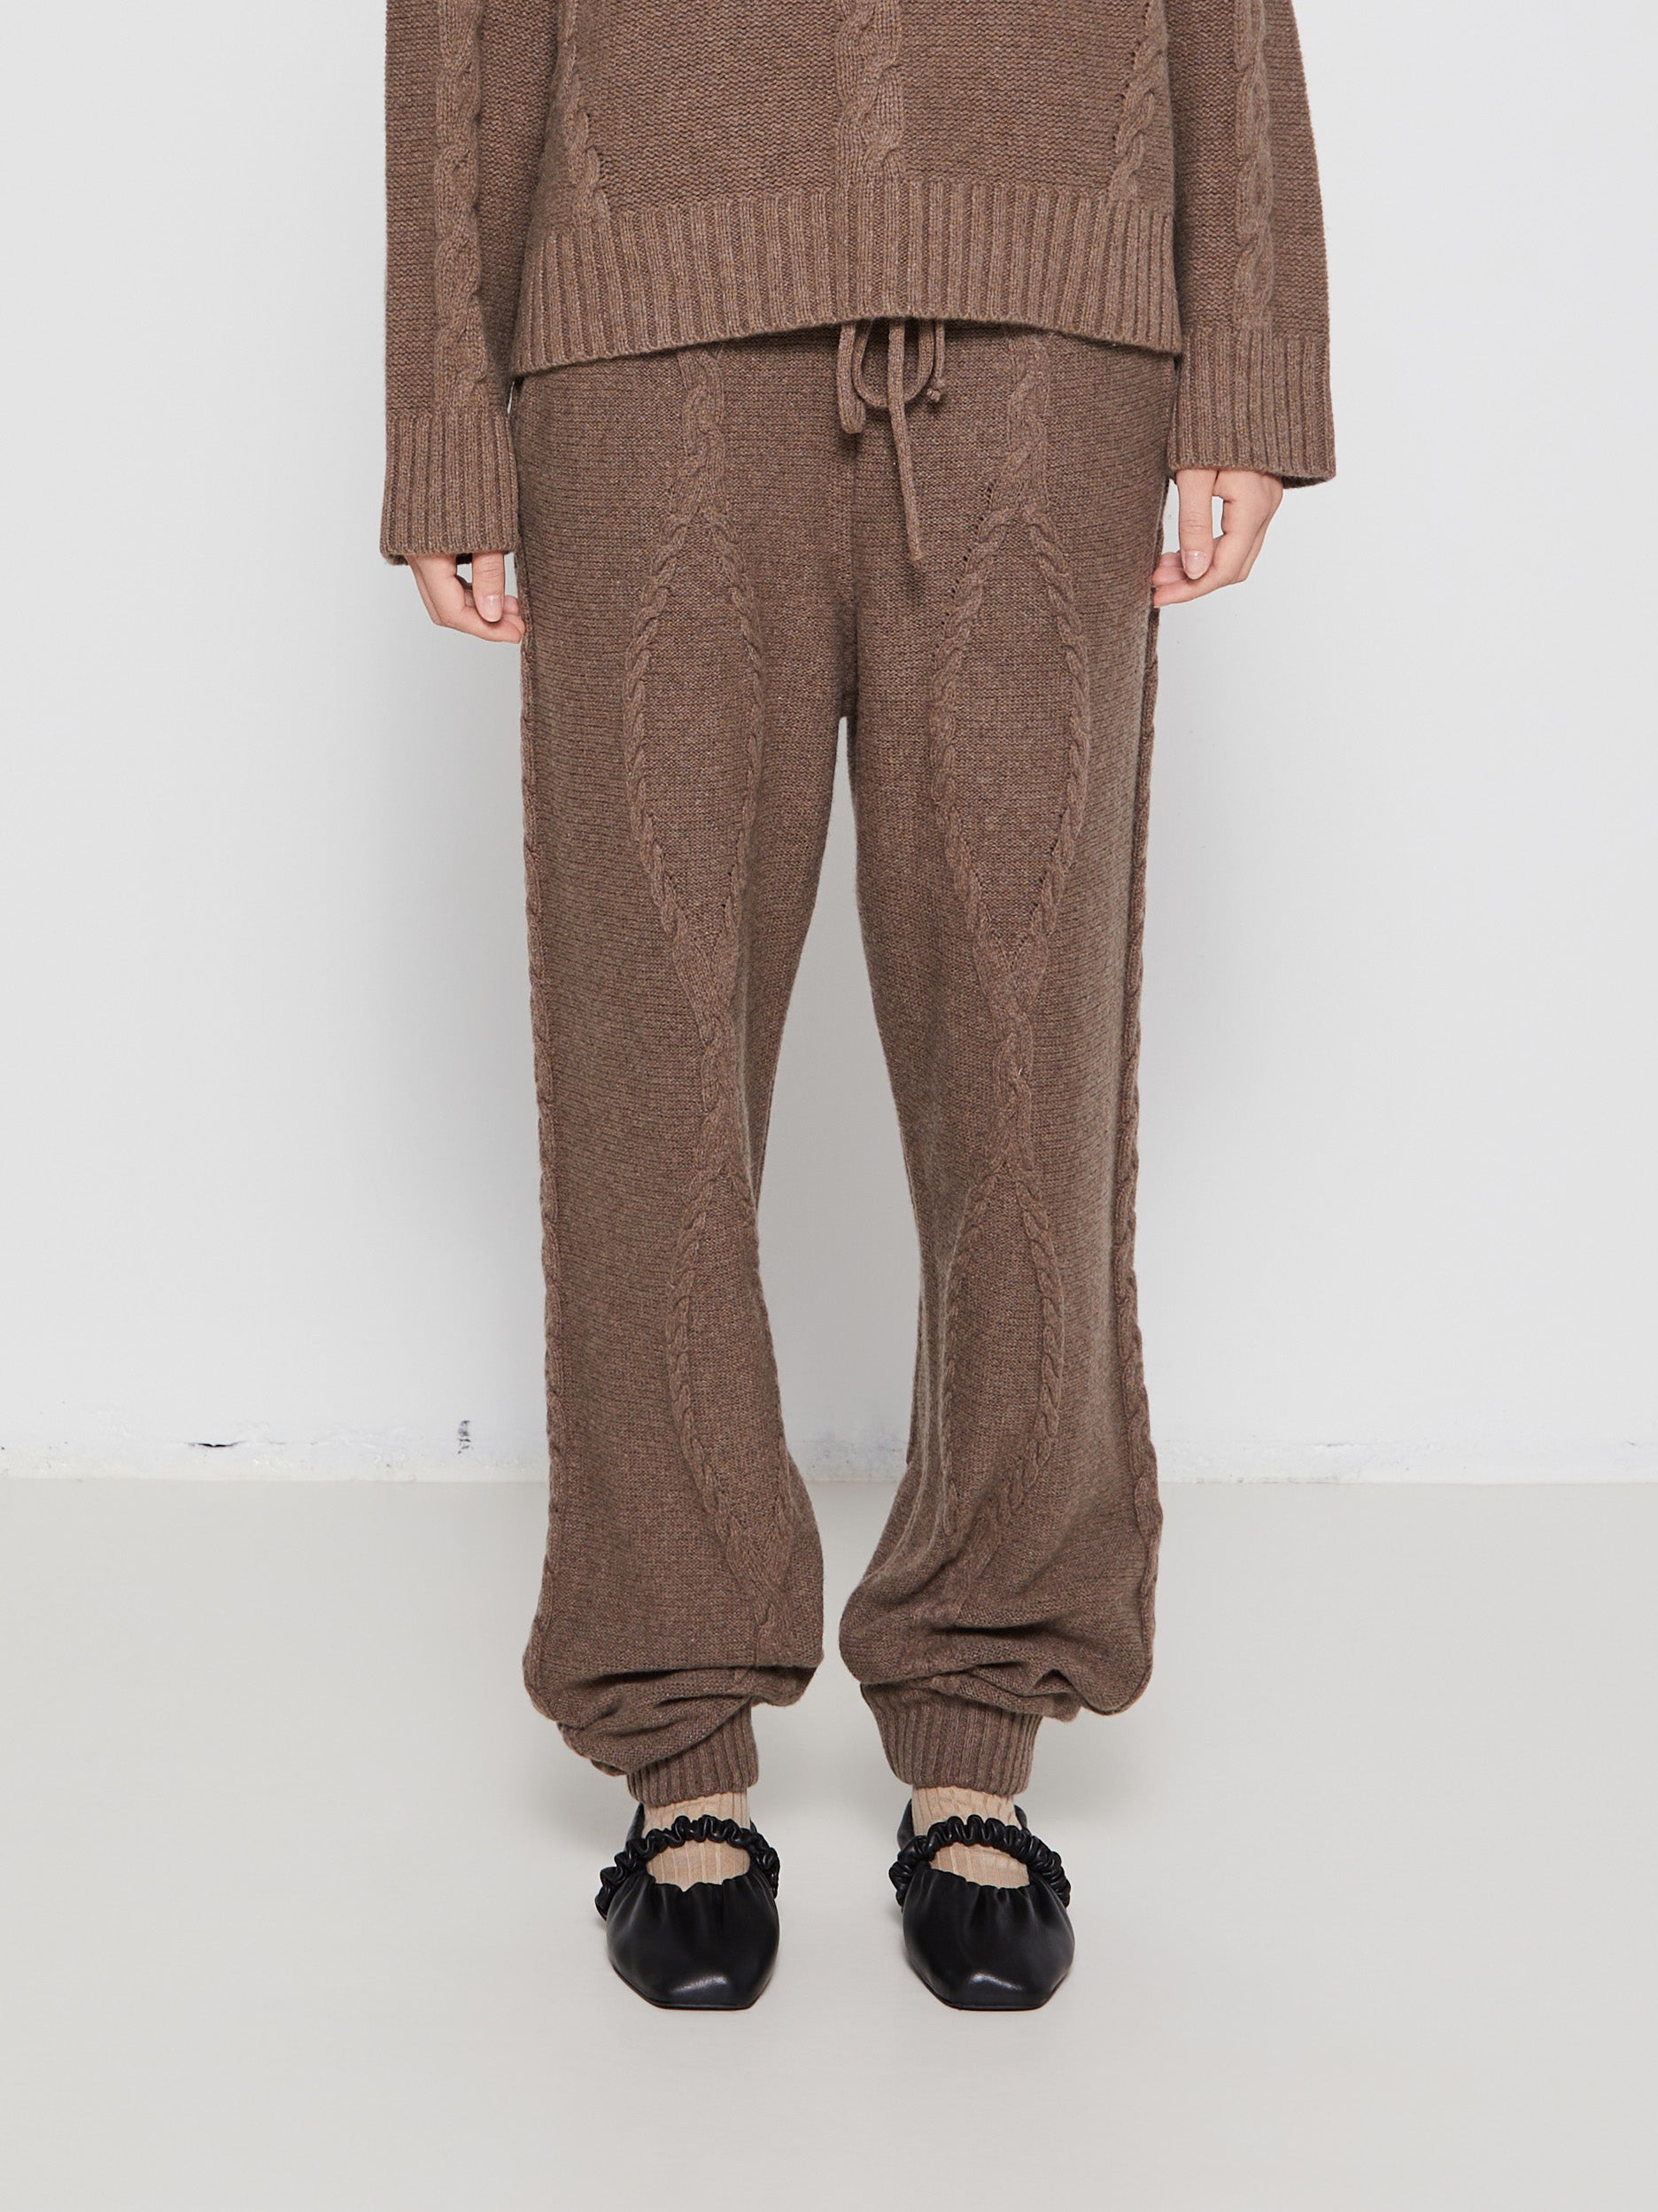 Proem Parades - Rakel Cashmere Trousers in Brown